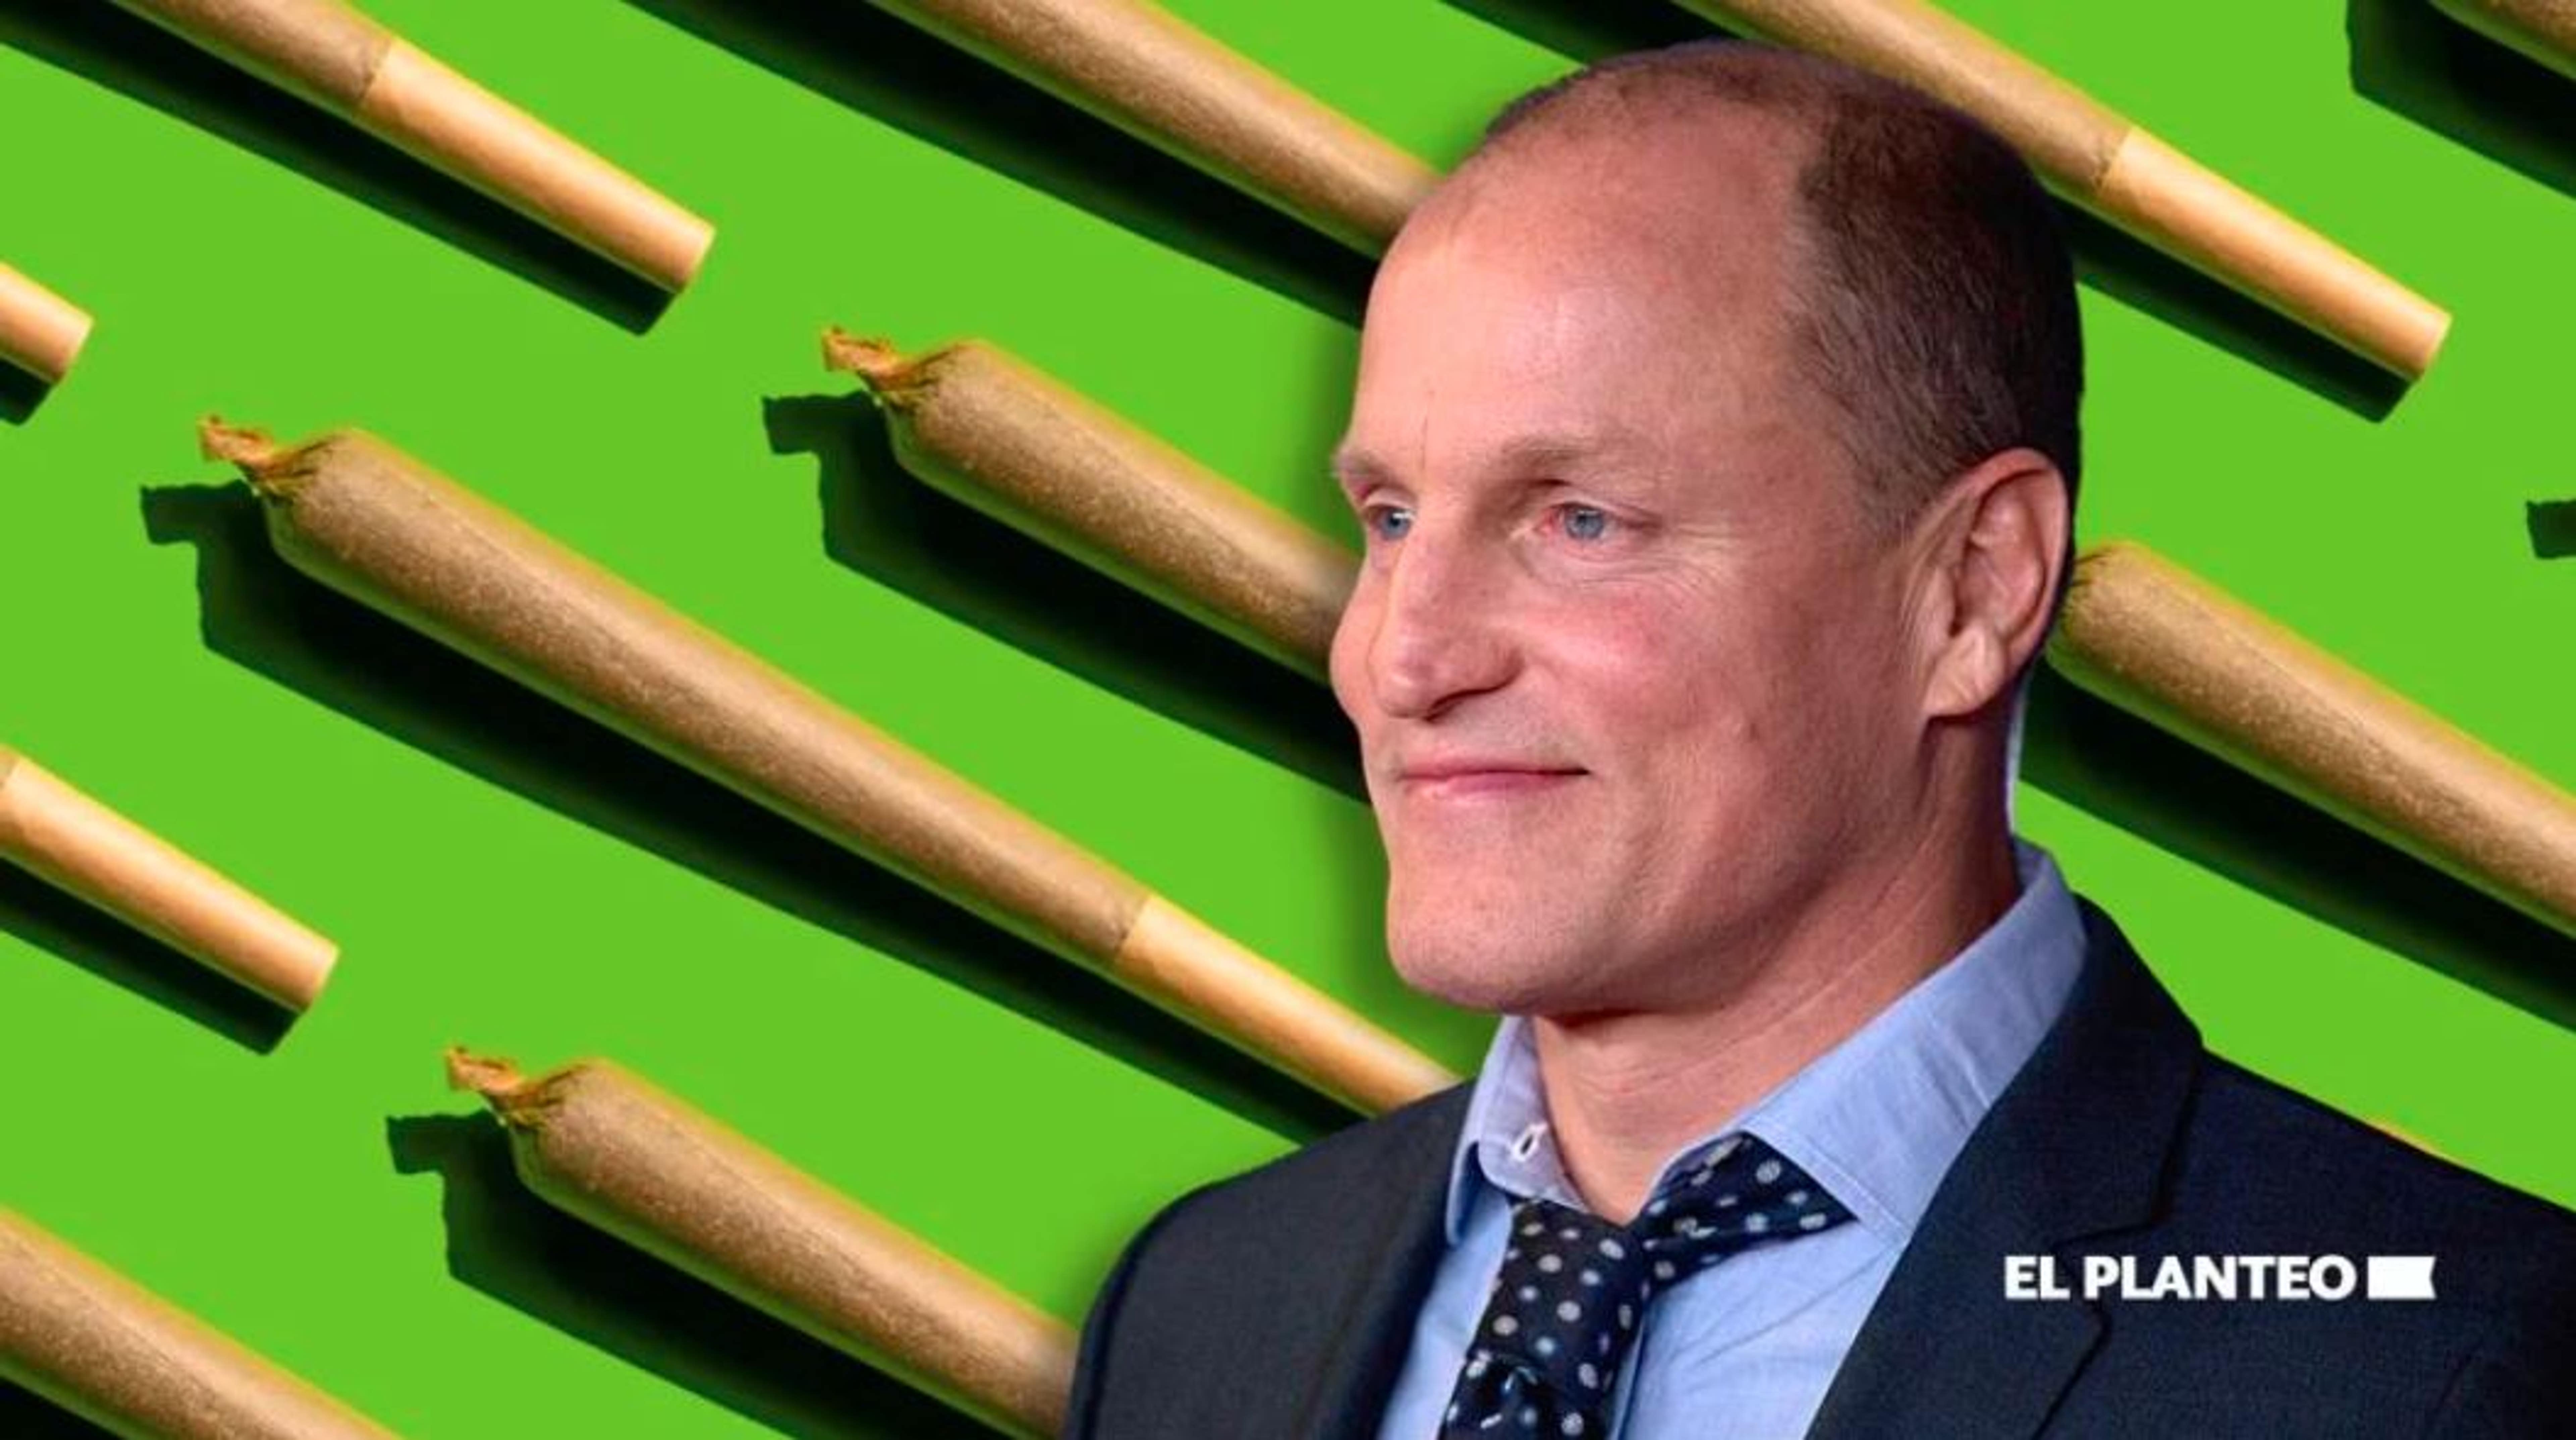 Woody Harrelson Will Open A Marijuana Dispensary, Judge At Cannabis Competition, The Emerald Cup